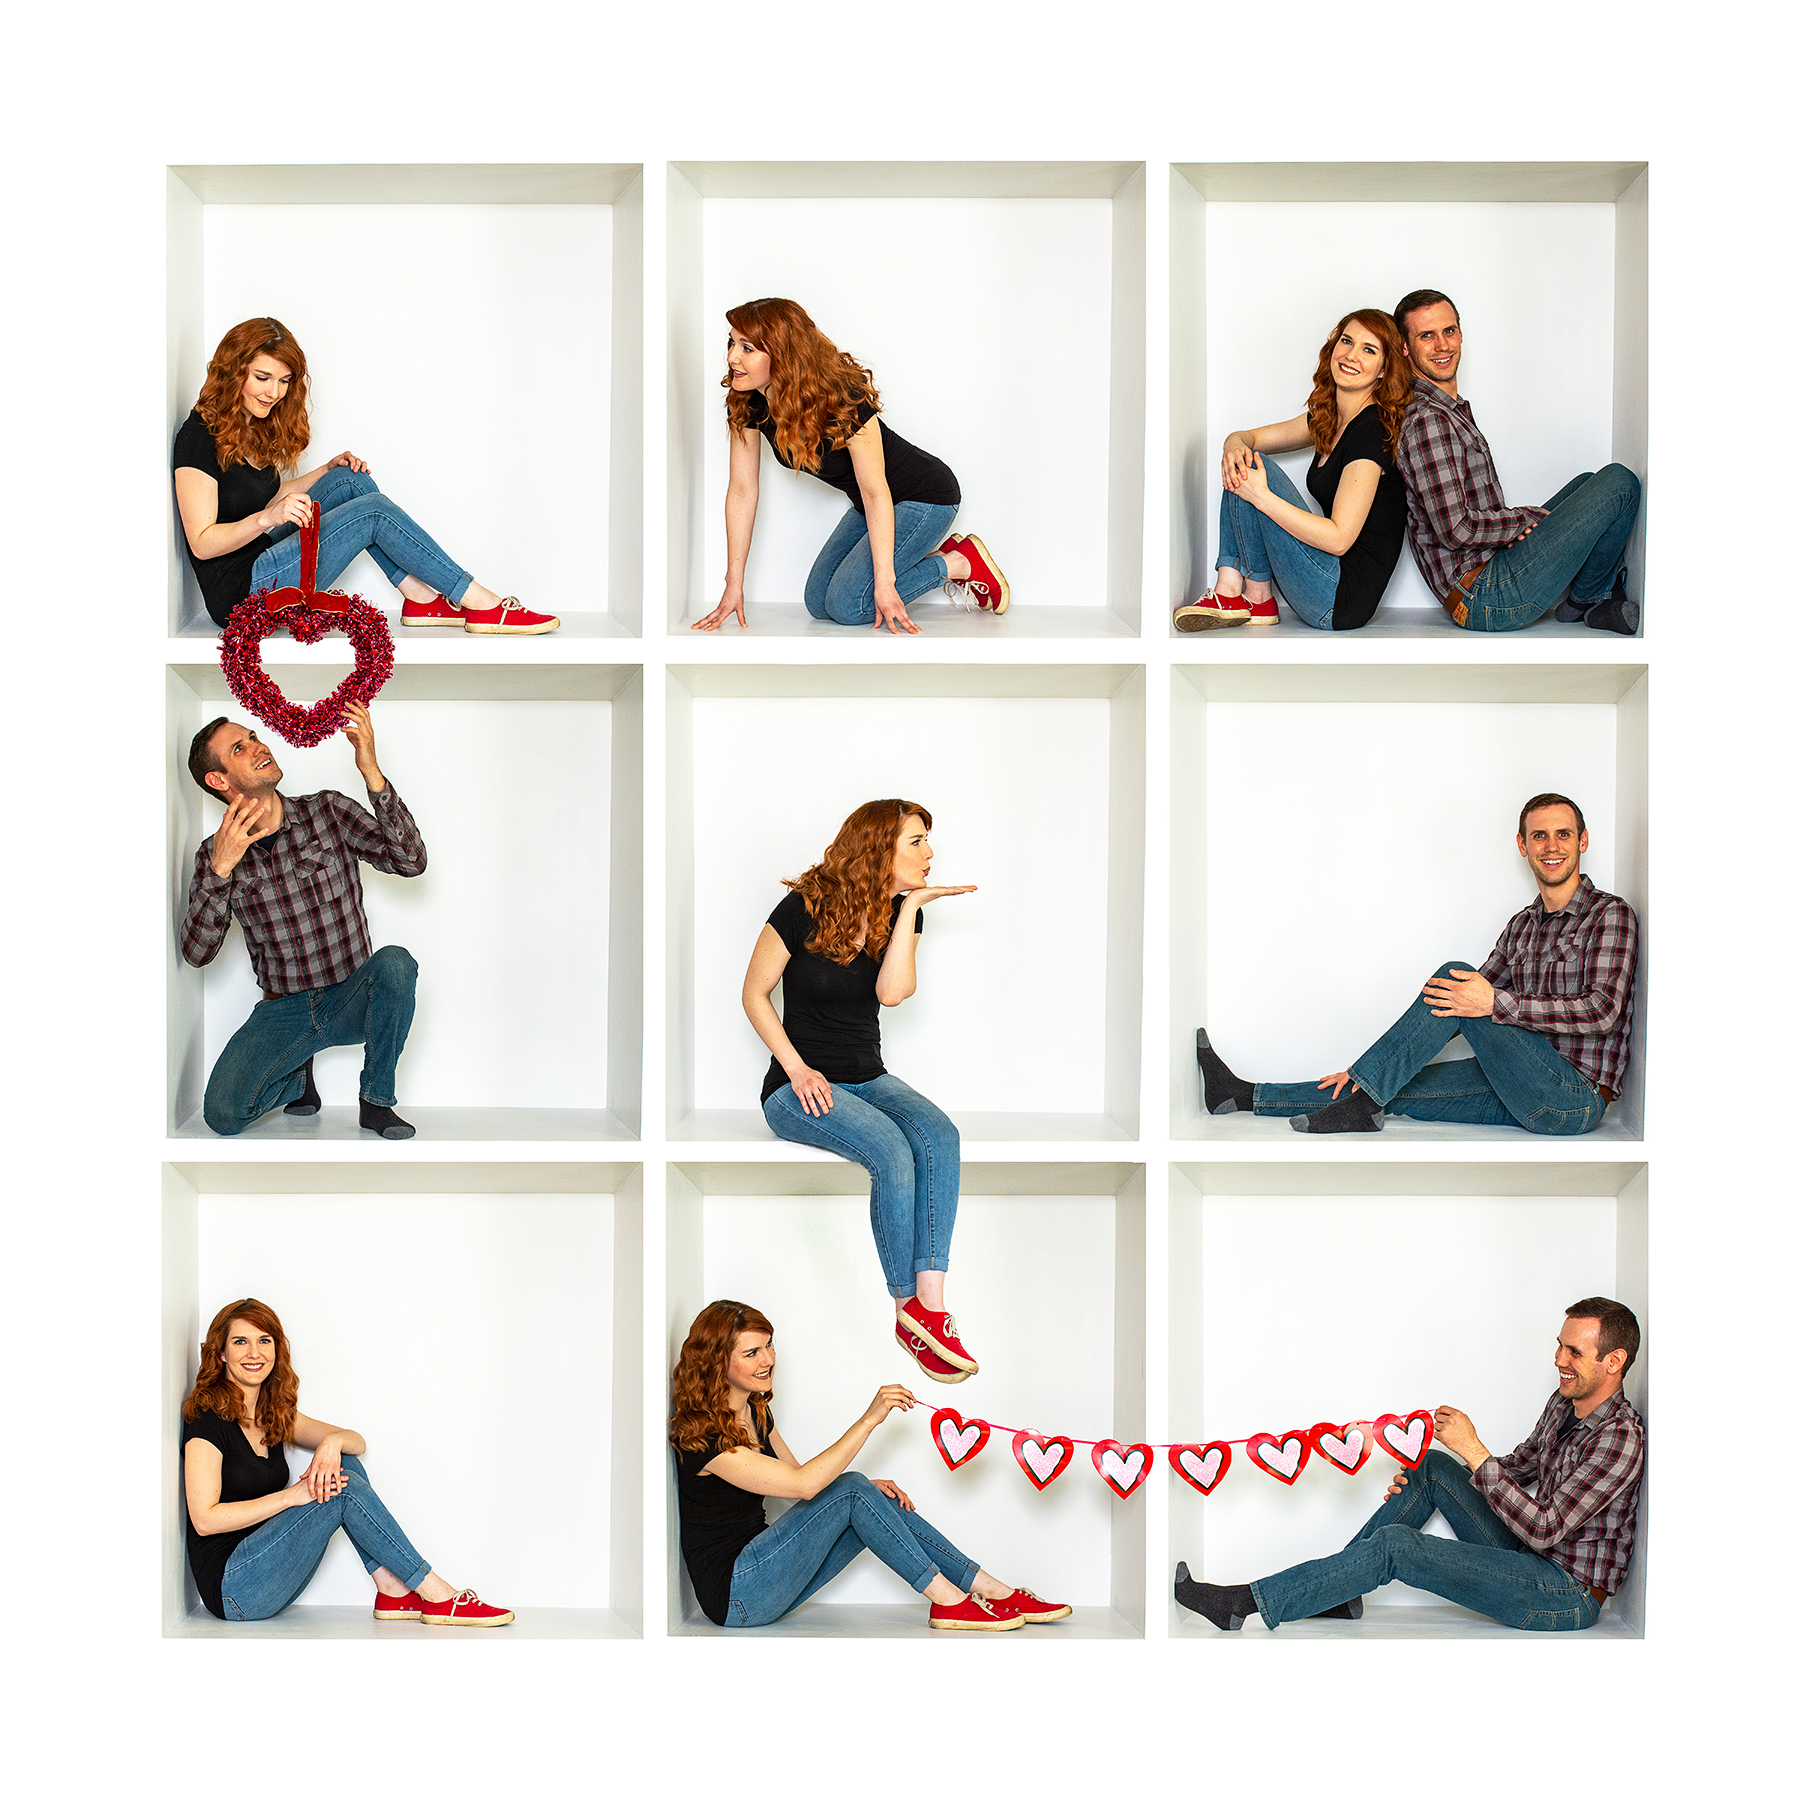 inside the box, valentines day, photo session, couples, cute couple, engaged, hearts, portrait, portrait session, family, photographer